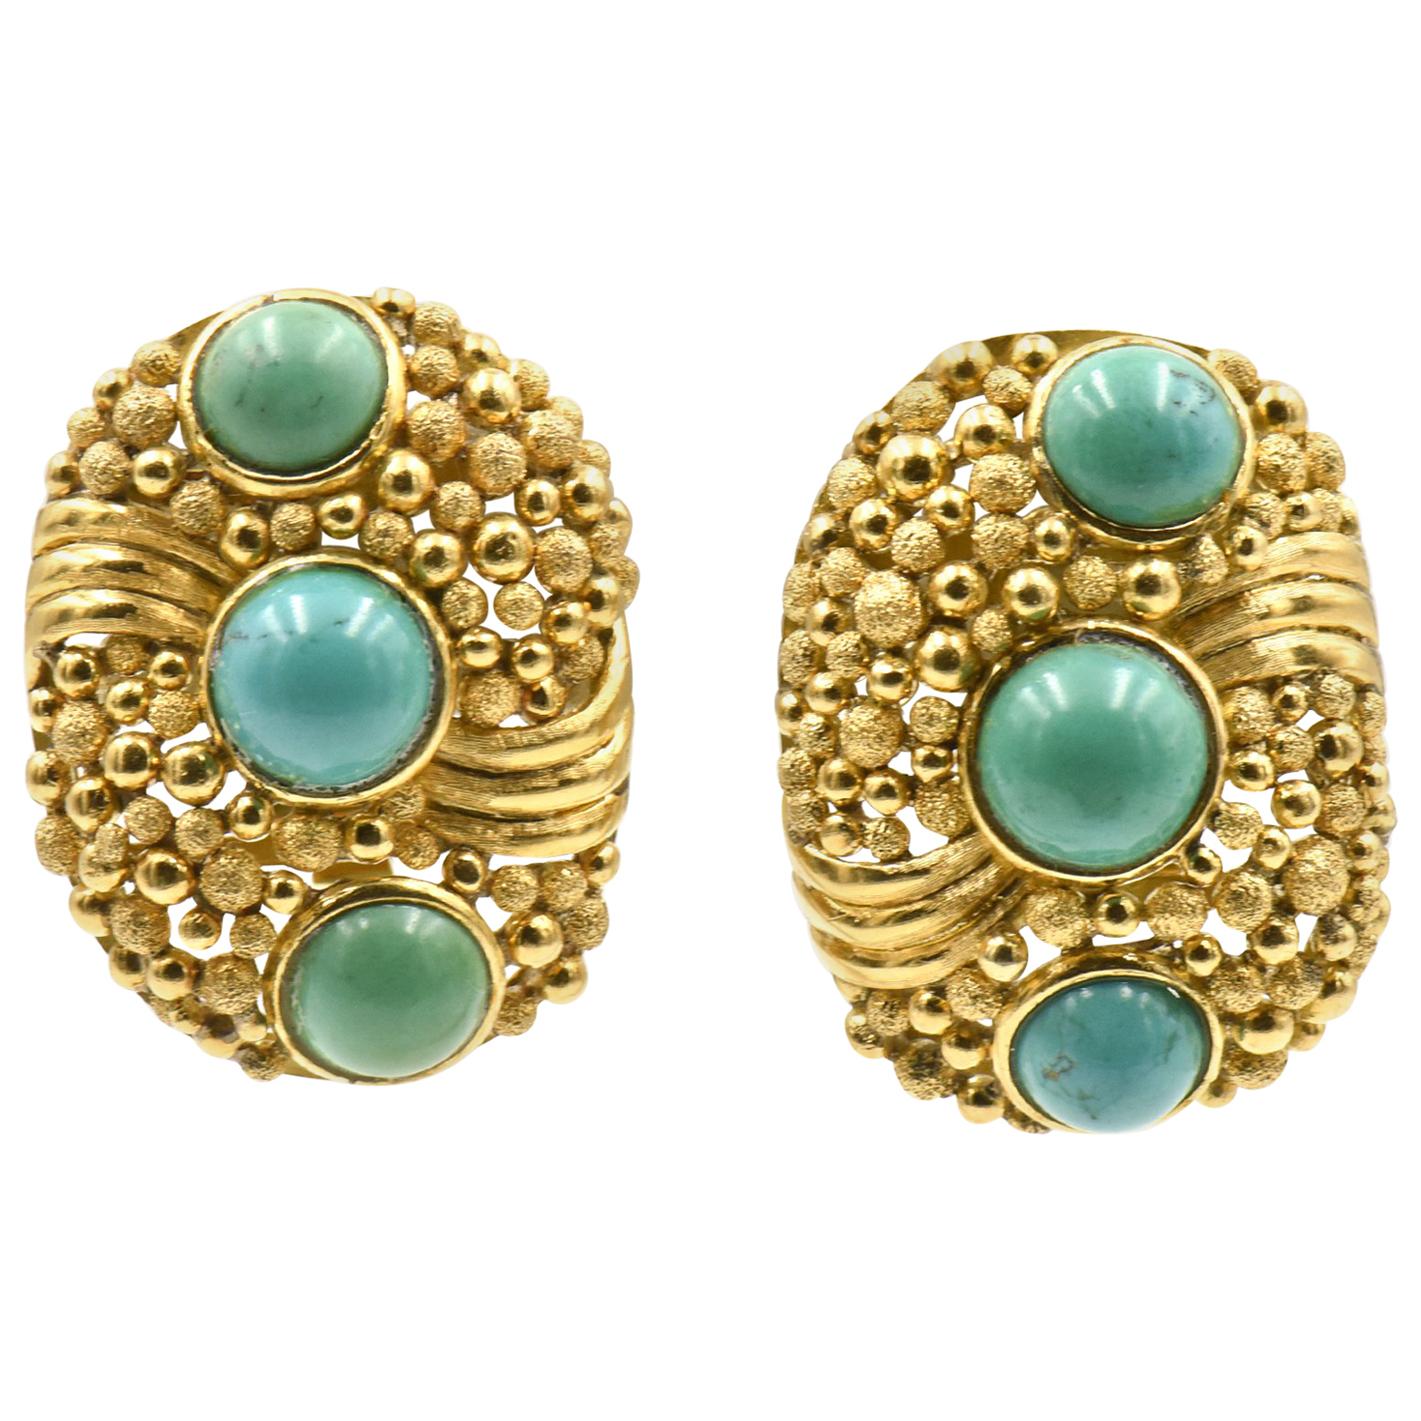 Large Modern 1970s Turquoise Textured Gold Earrings